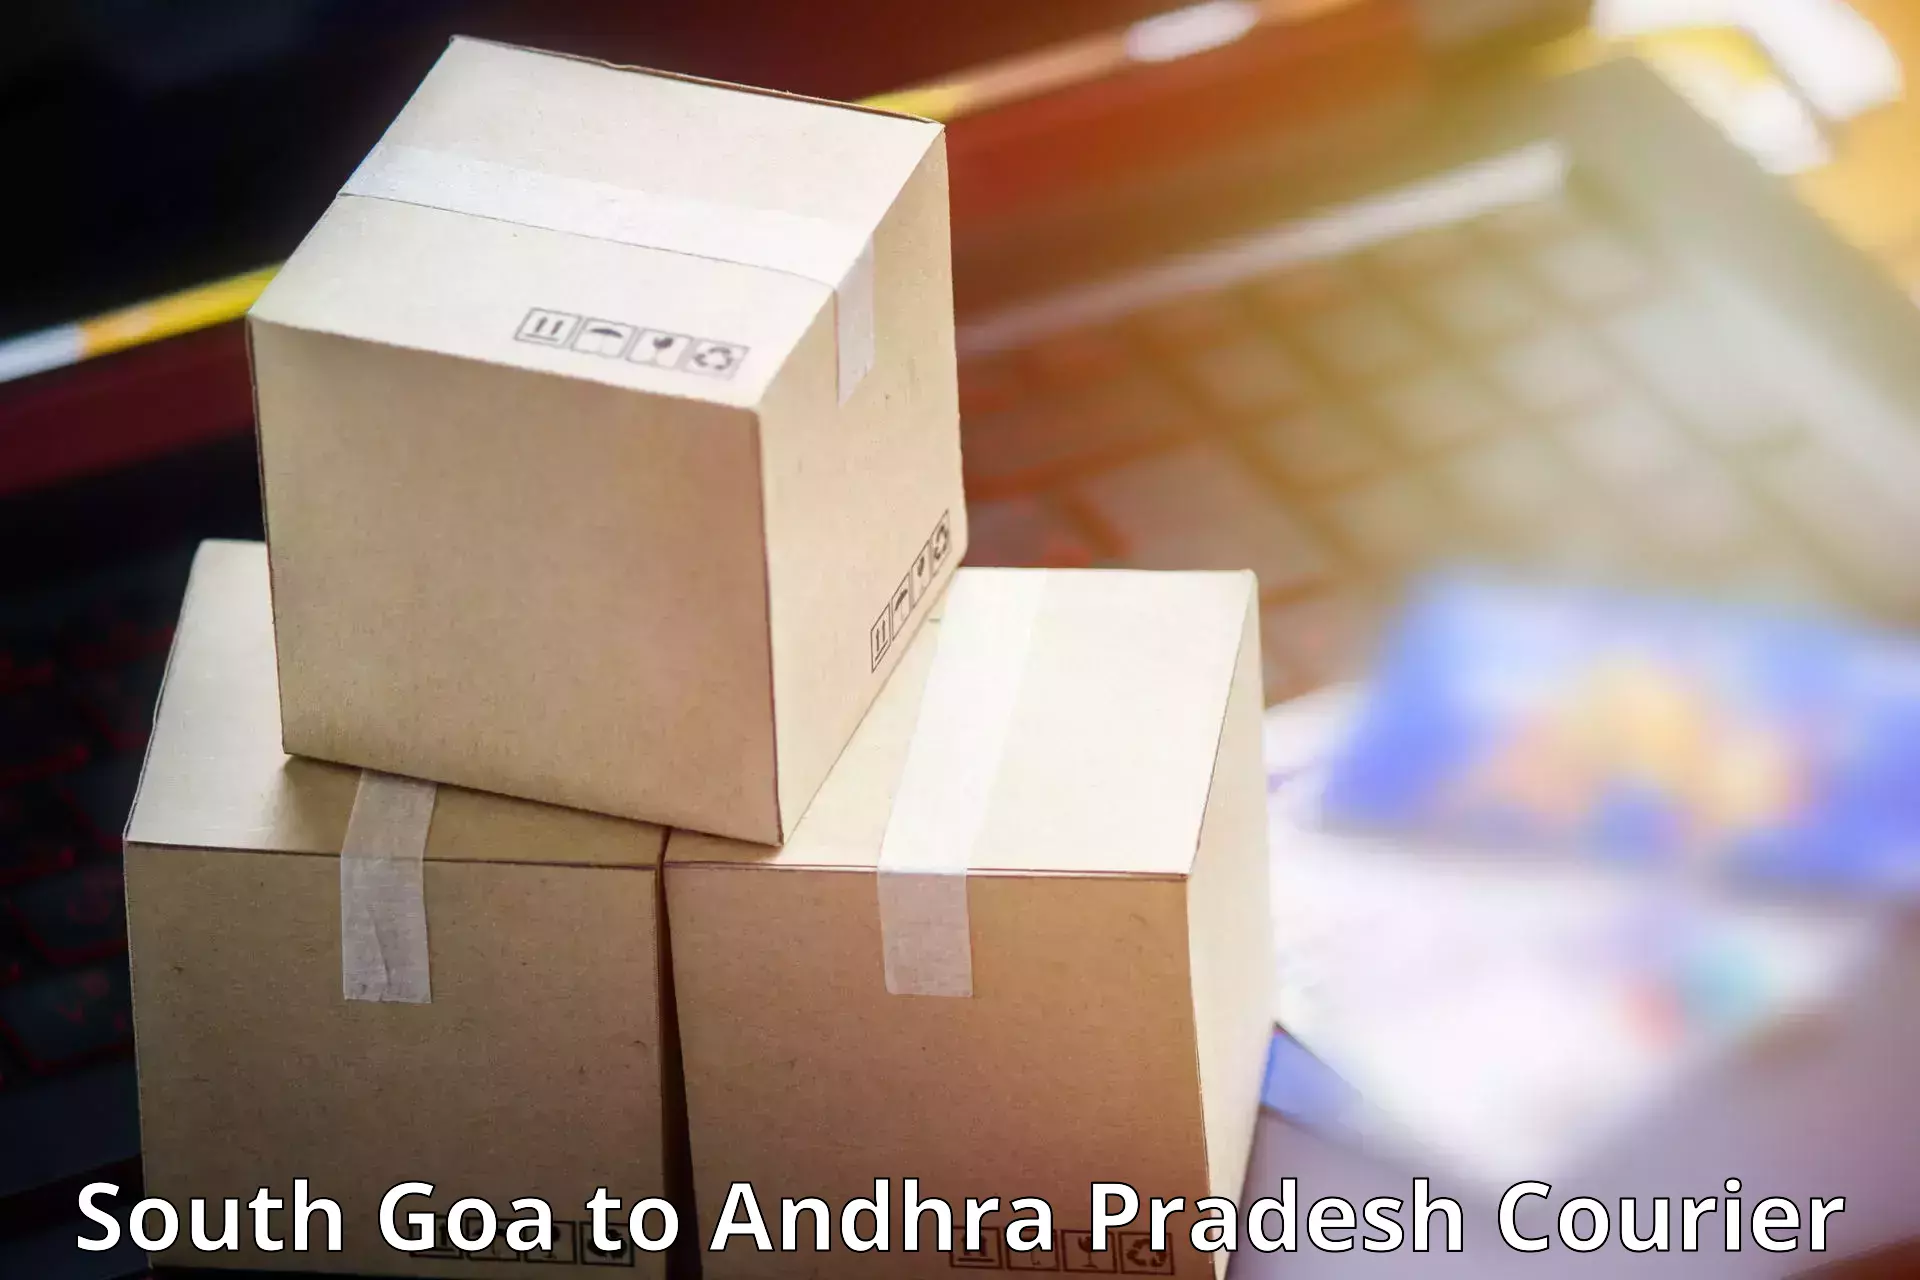 Dynamic courier operations in South Goa to Sunkara Palem